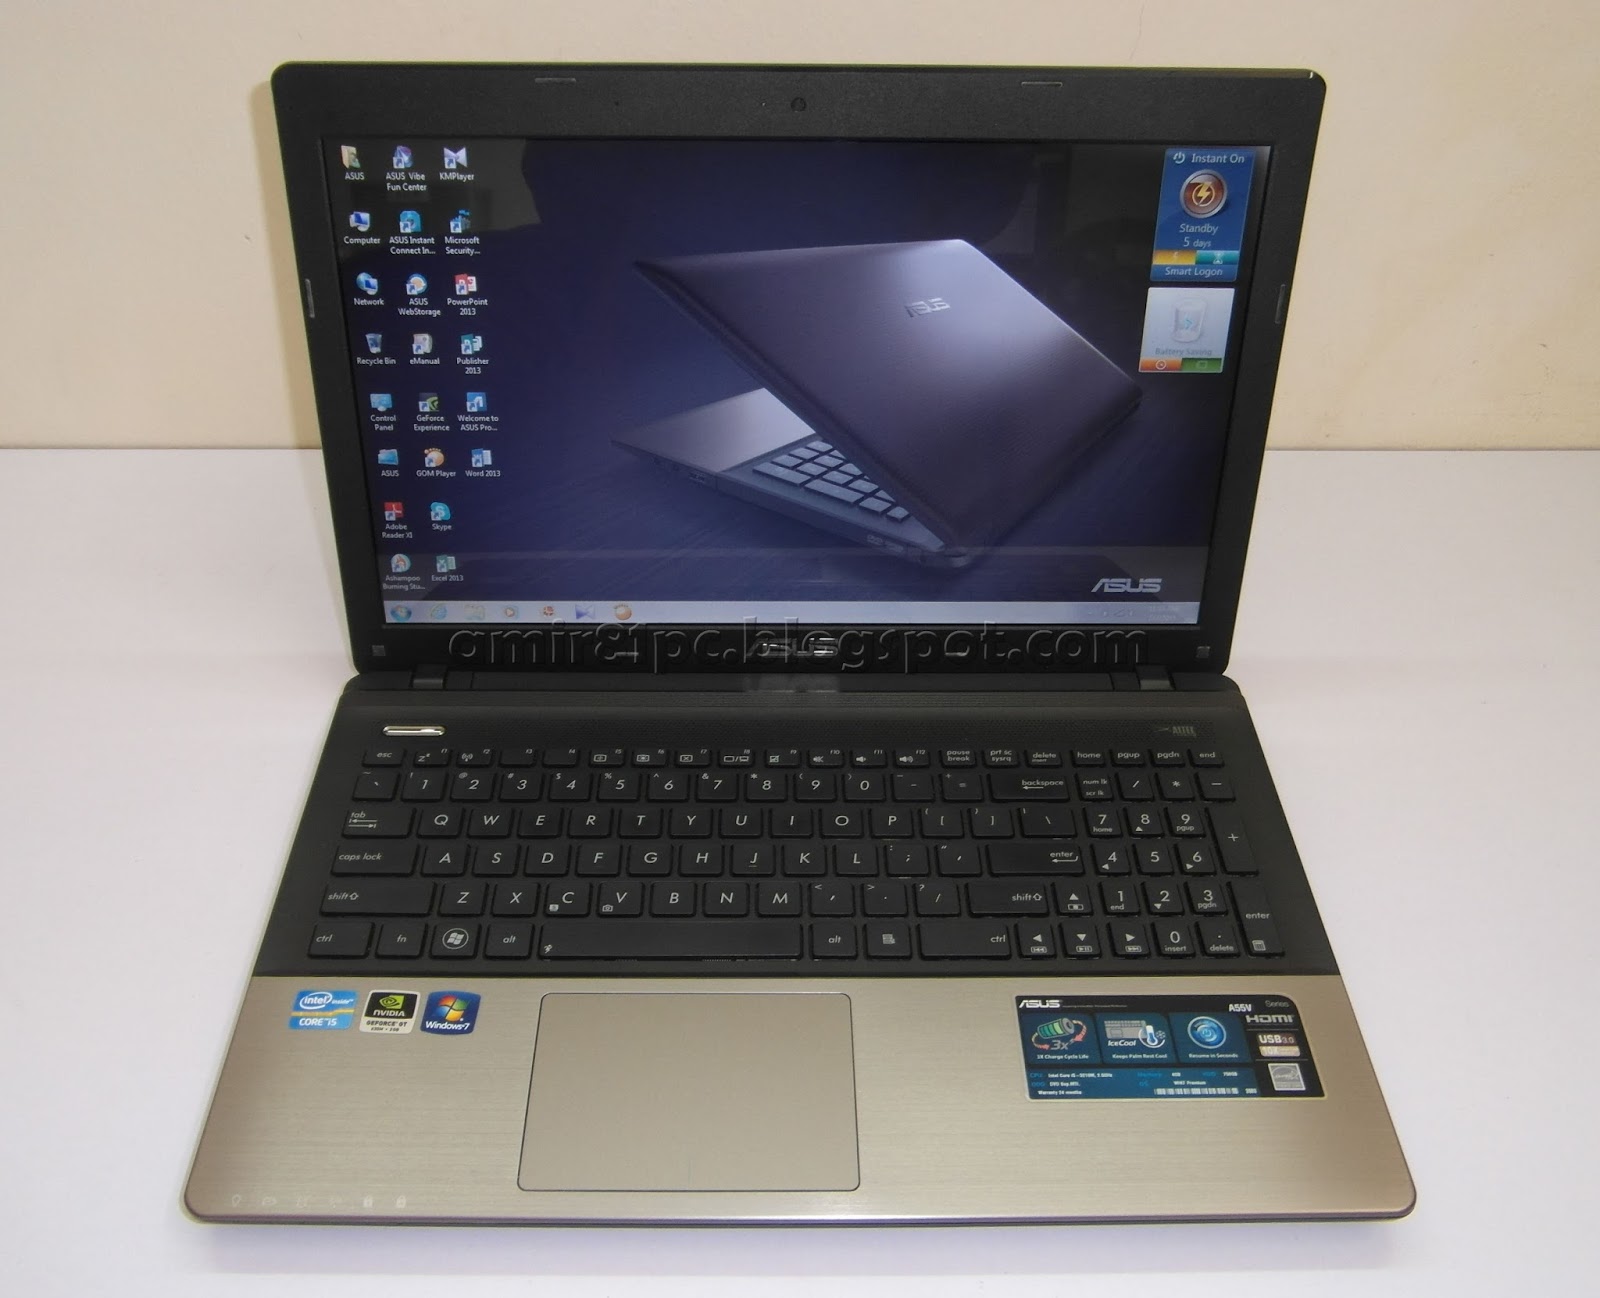 Three A Tech Computer Sales and Services Used Laptop Asus 